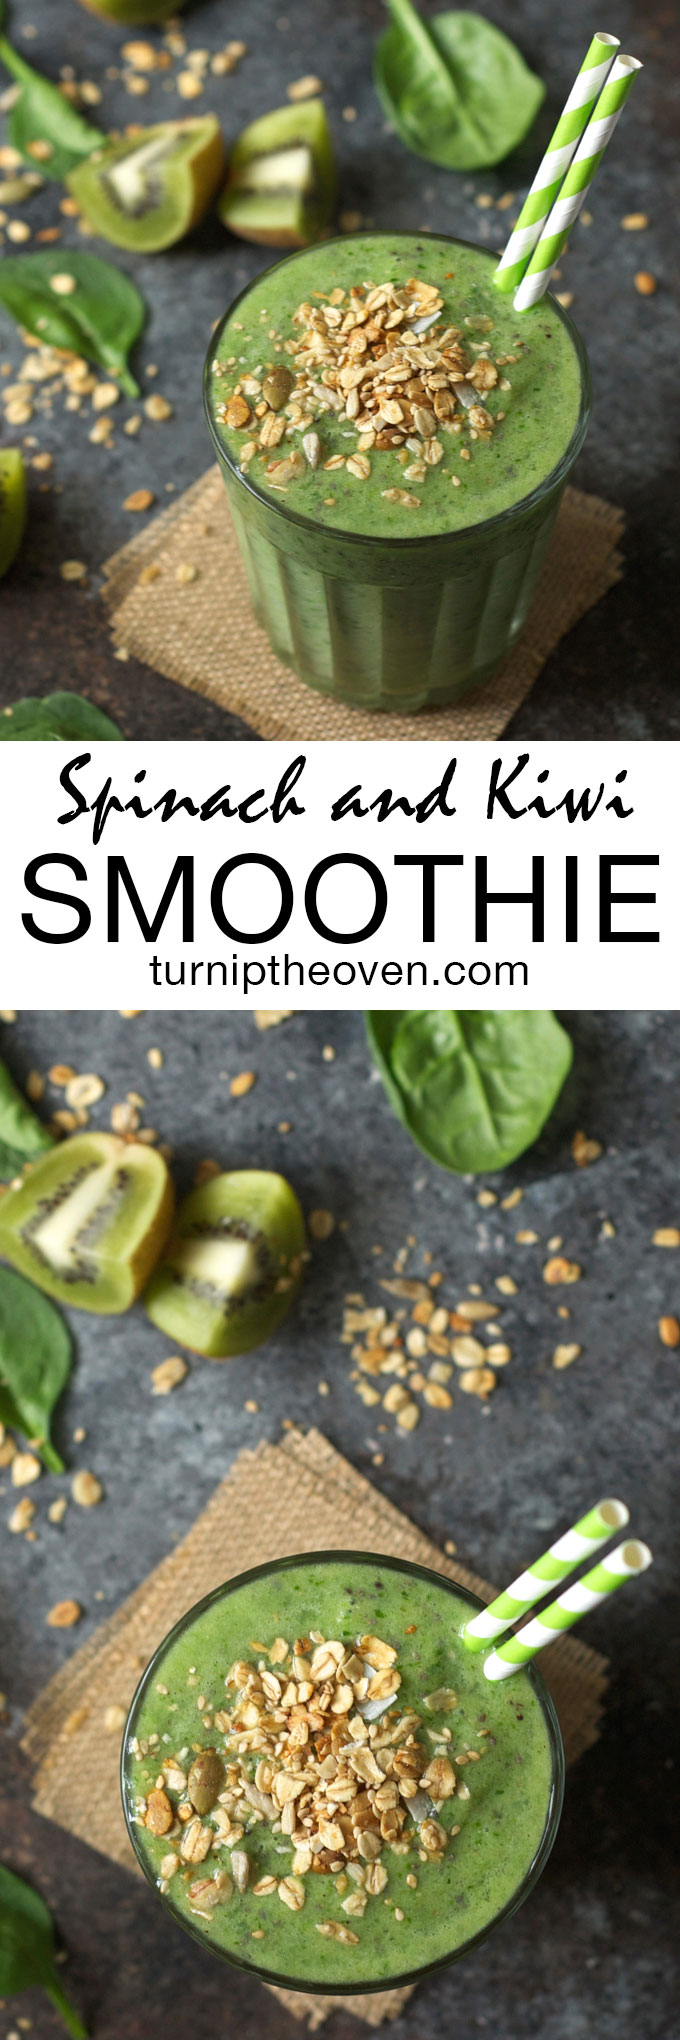 Start your morning off right with the tropical green smoothie made with spinach and kiwi. It's vegan and gluten-free, and a great way to include all-natural fruits and veggies into your daily routine!